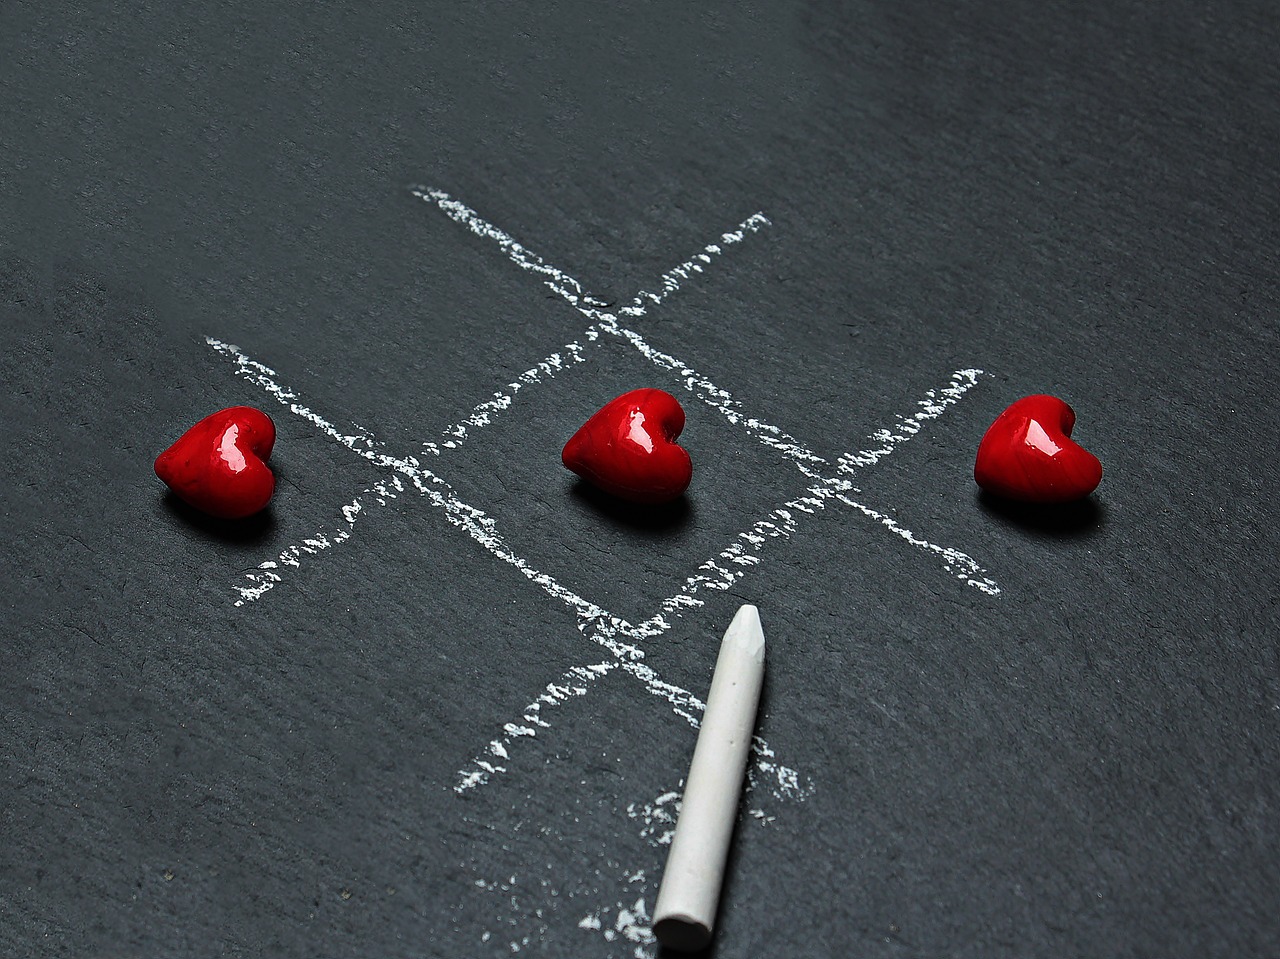 Tic-tac-toe with hearts on a chalkboard.